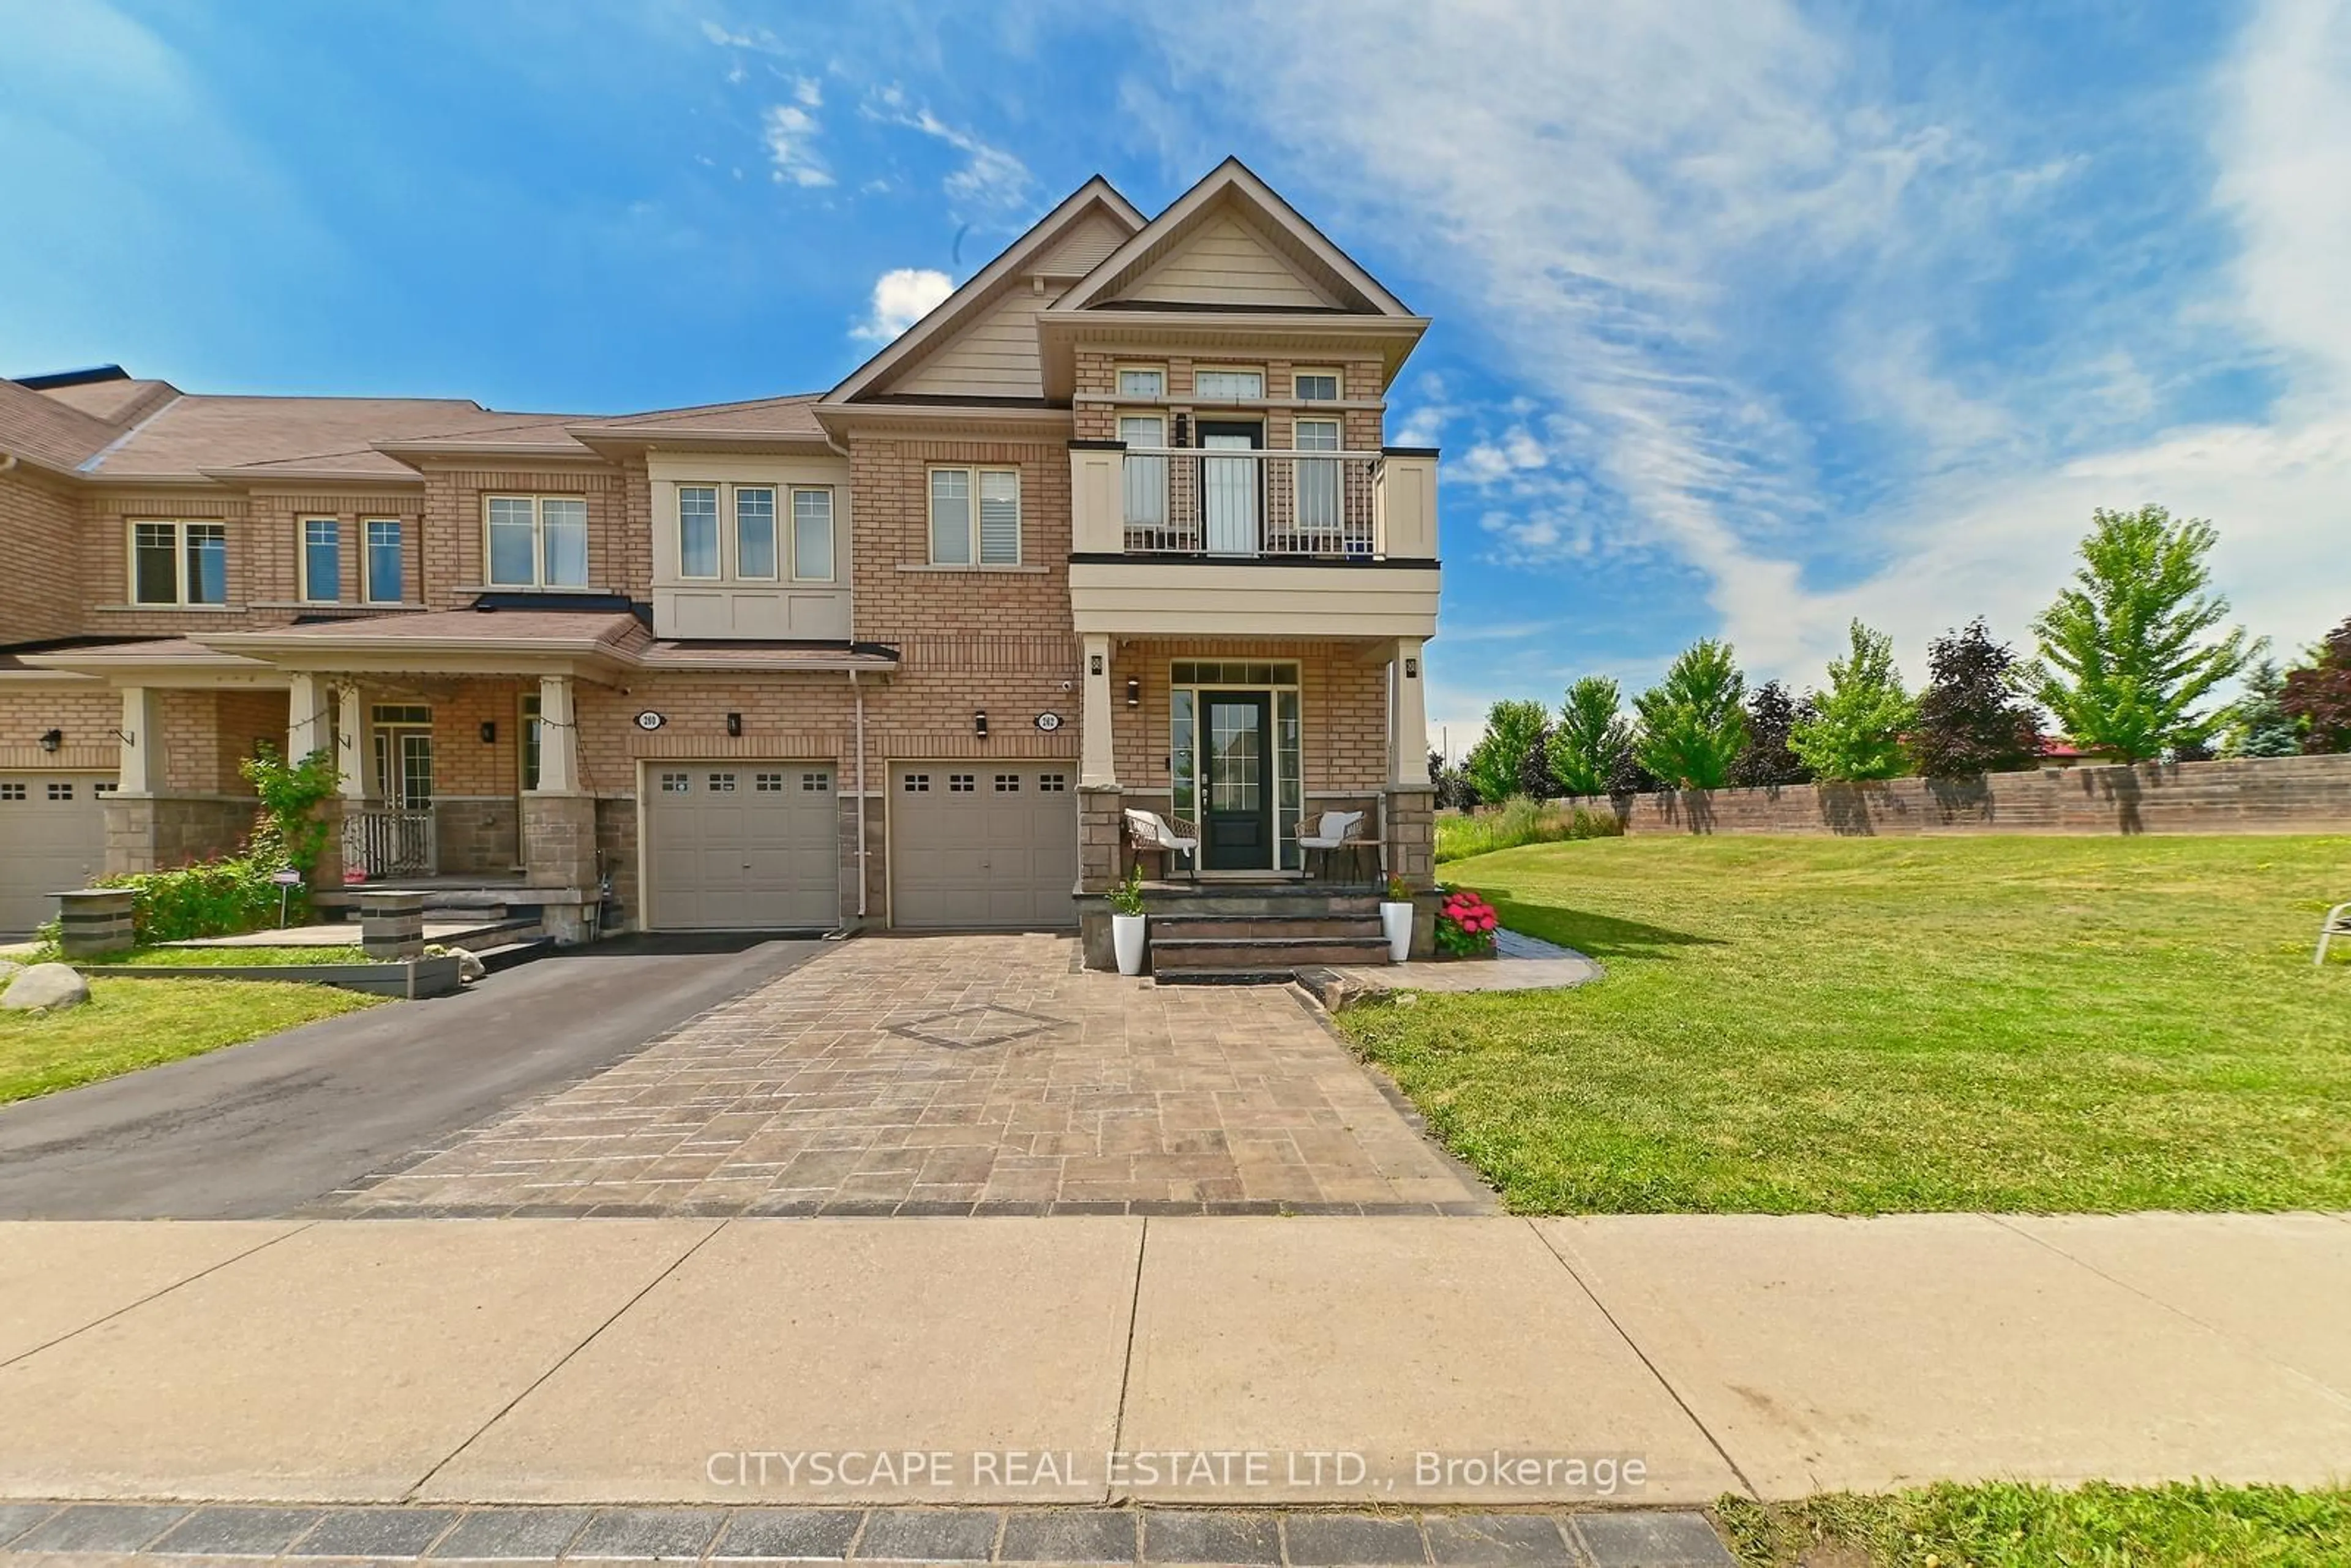 Home with brick exterior material for 262 Sky Harbour Dr, Brampton Ontario L6Y 2Z5